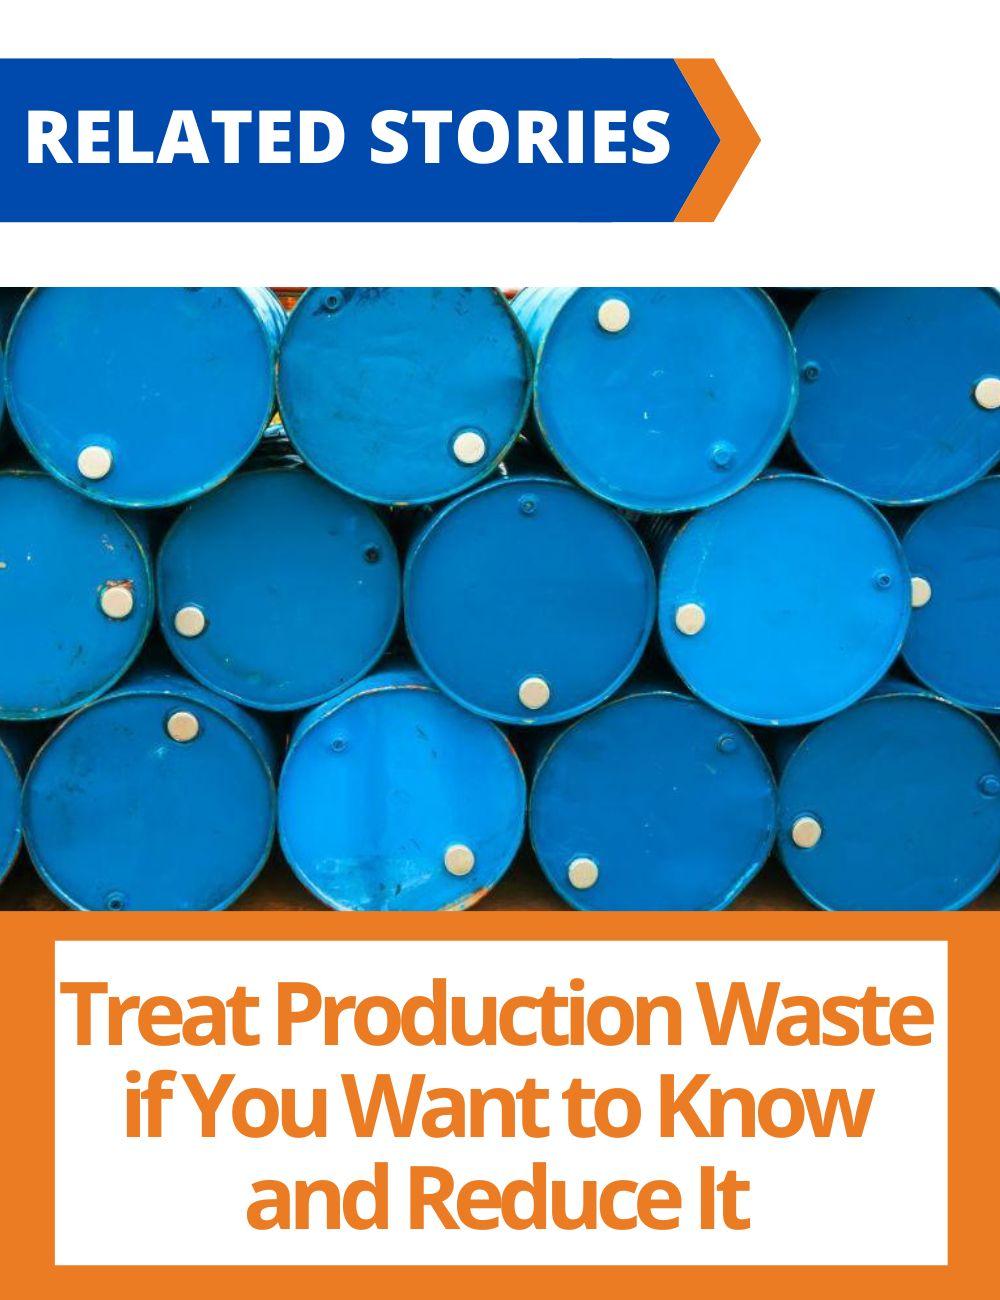 Link to related stories. Image: blue barrels. Story headline: Treat Production Waste if You Want to Know and Reduce It